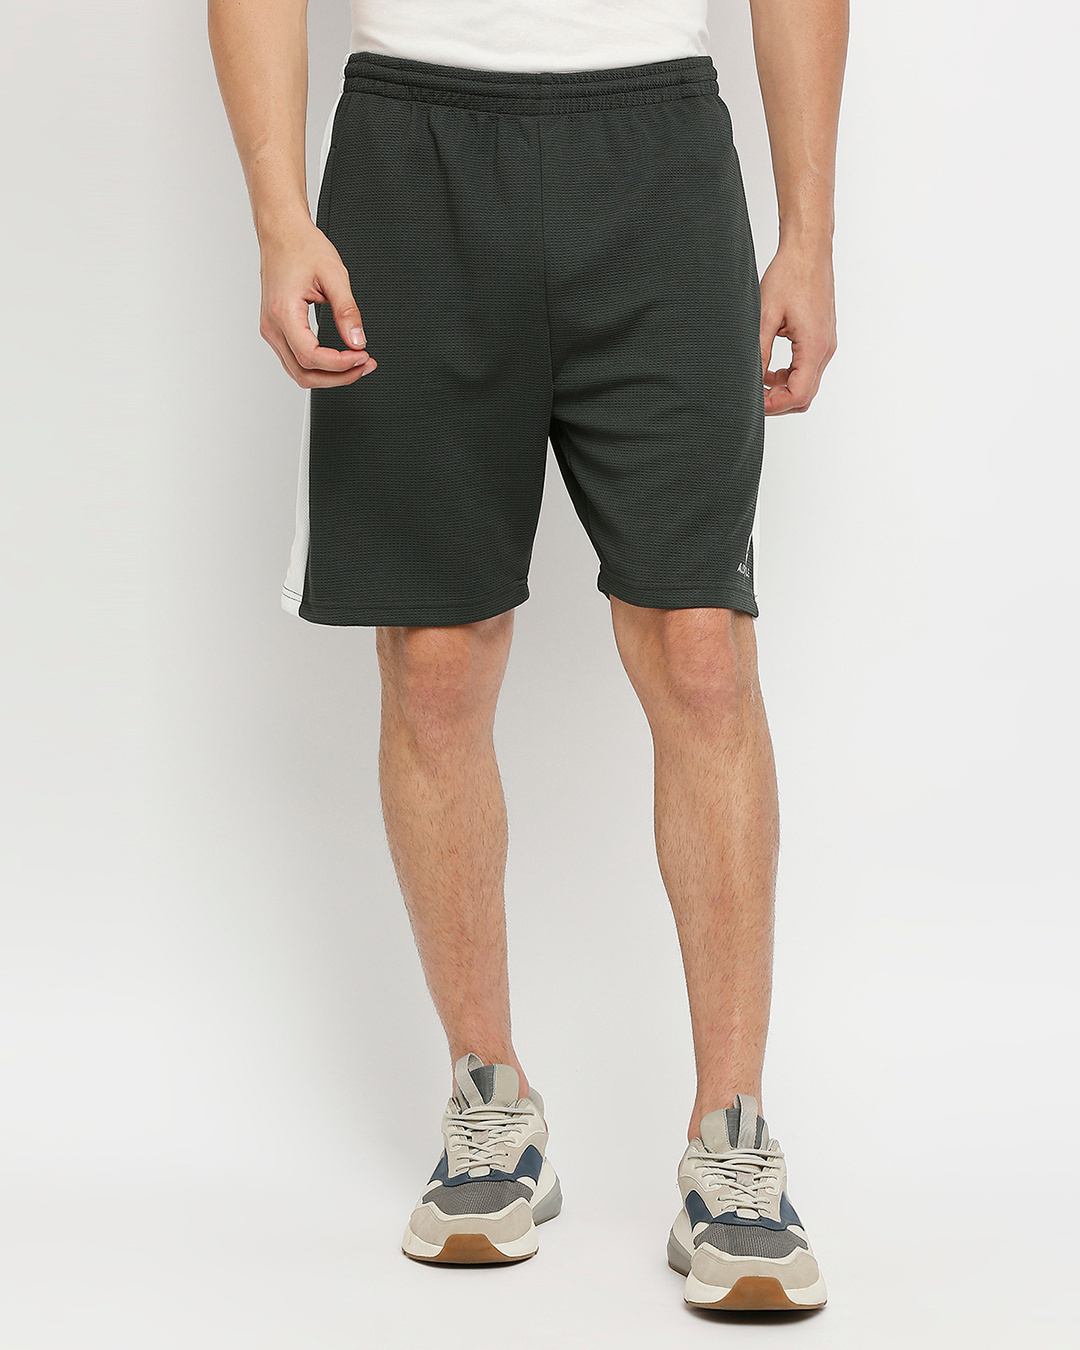 Buy Men's Grey Shorts with White Side Panel Online at Bewakoof